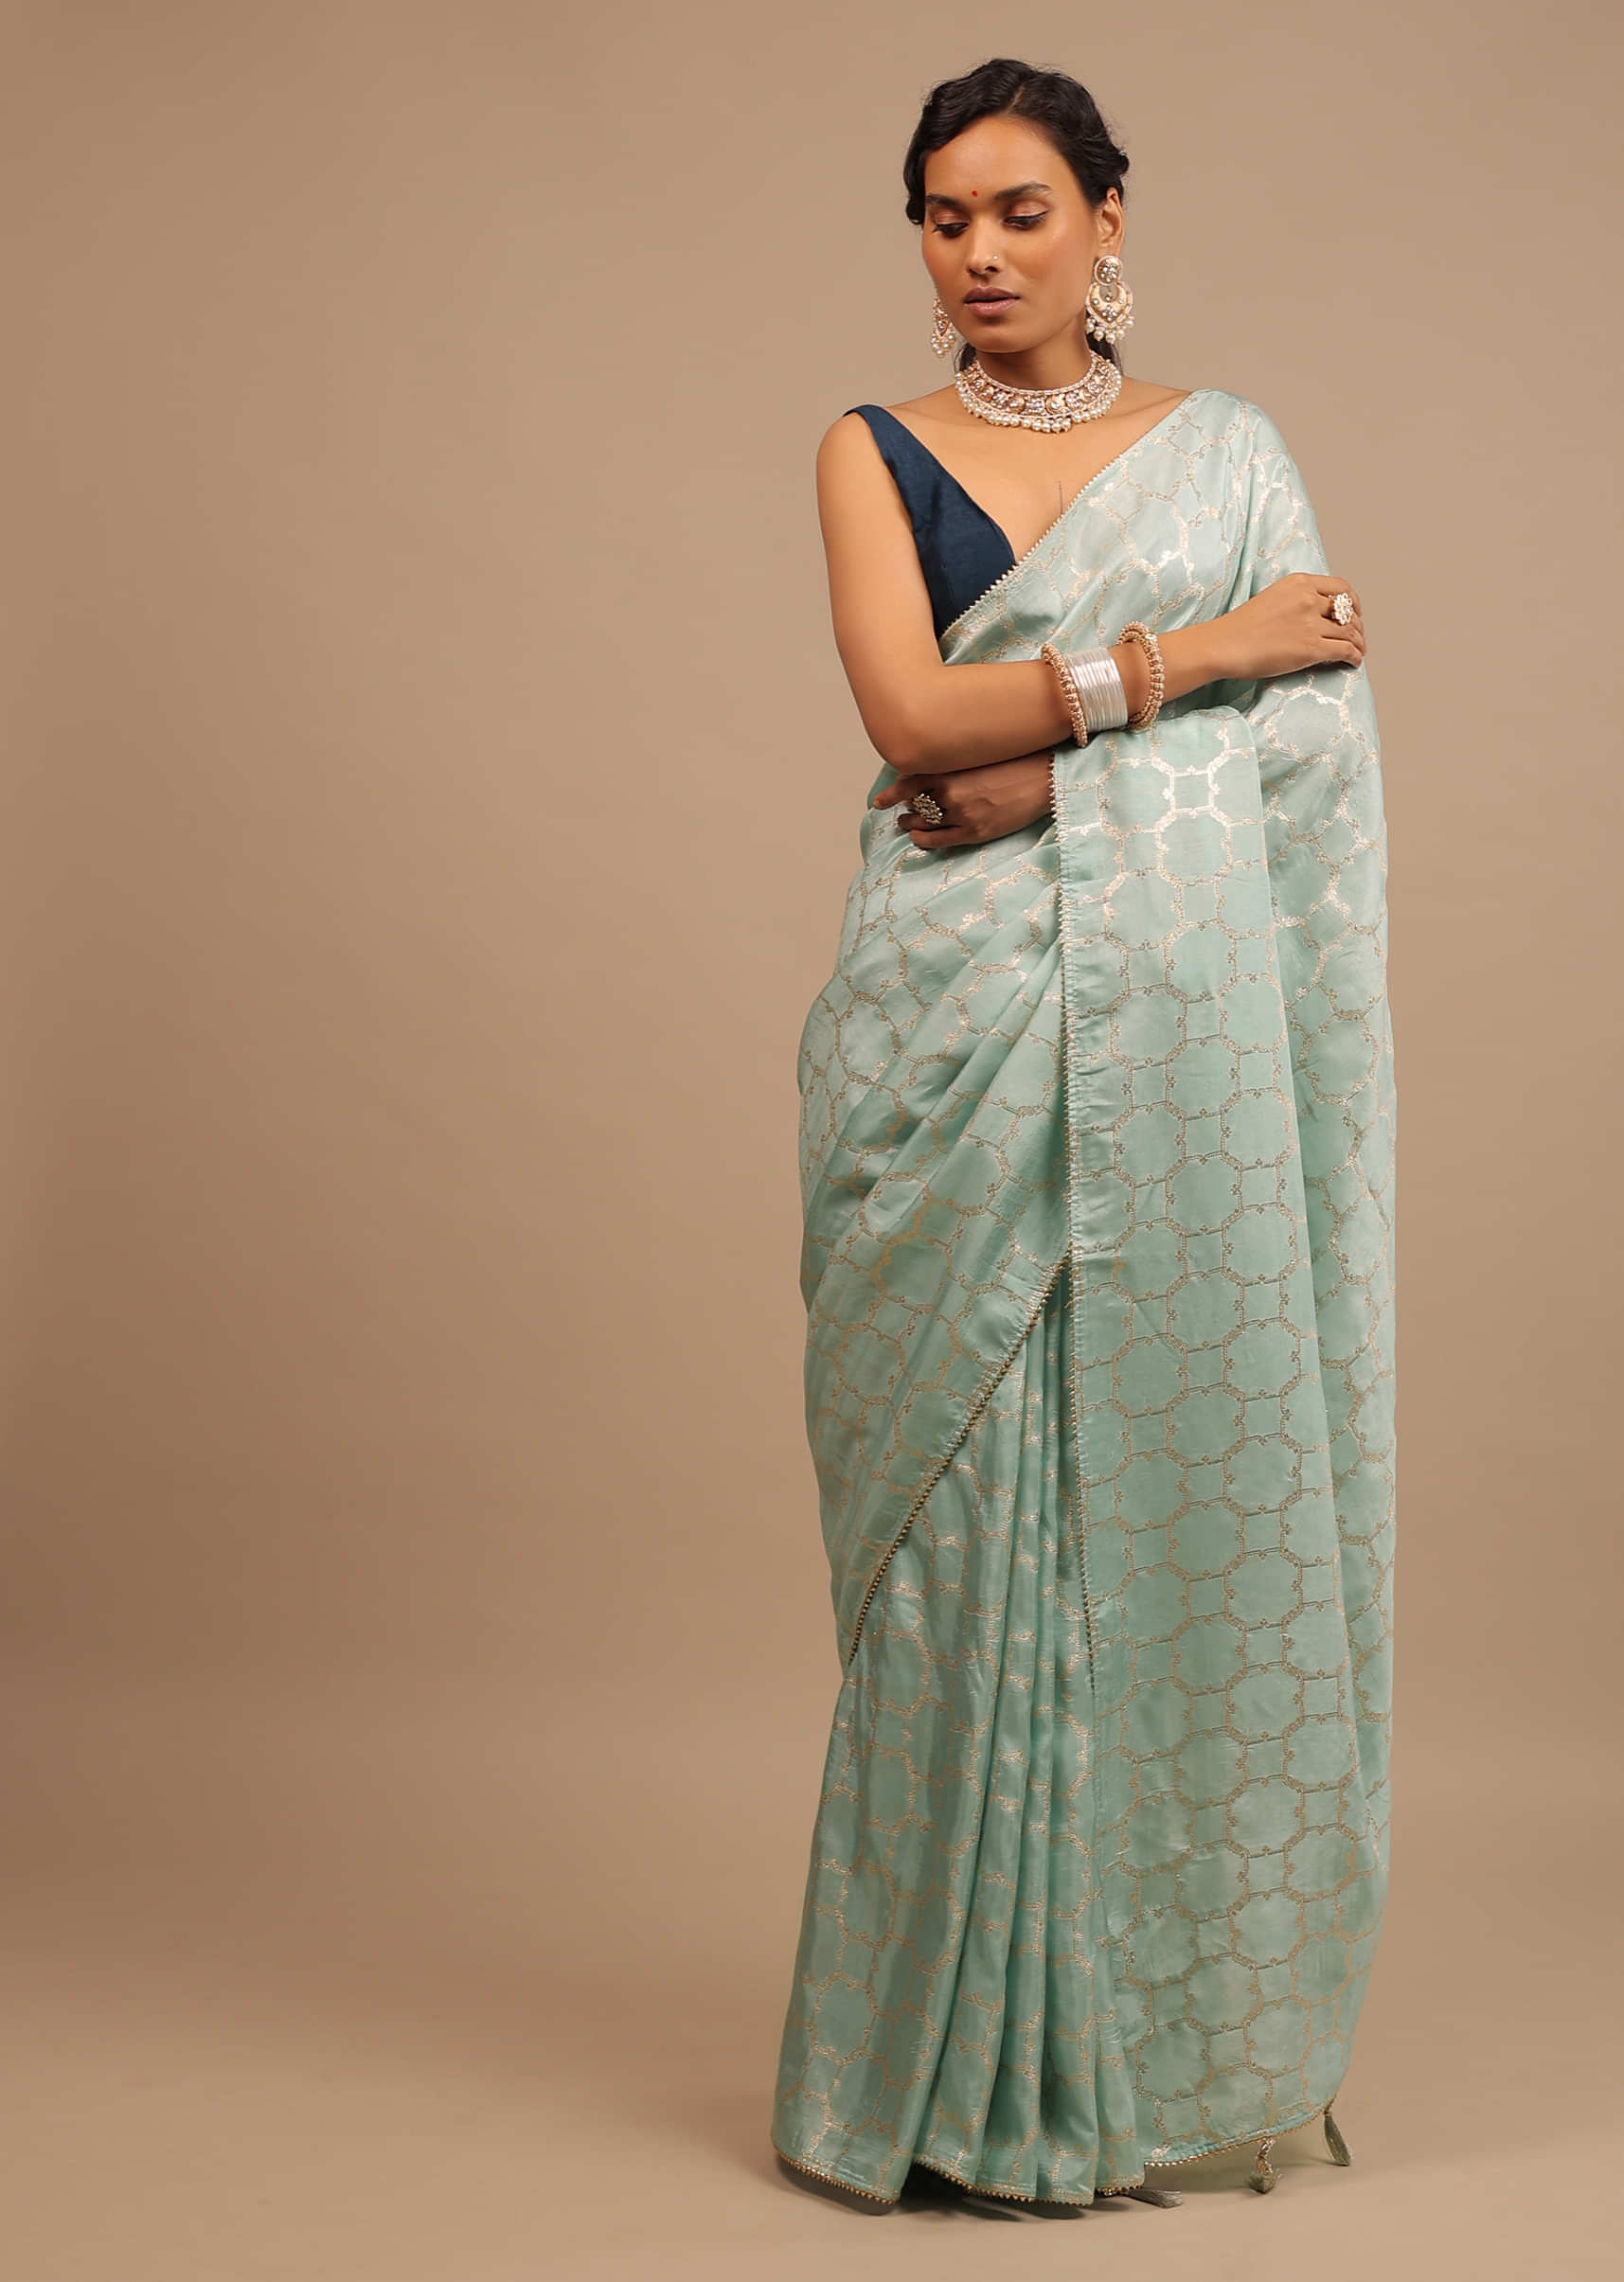 Aqua Glass Green Saree In Dola Silk With Lurex Woven Moroccan Jaal And Unstitched Patola Blouse